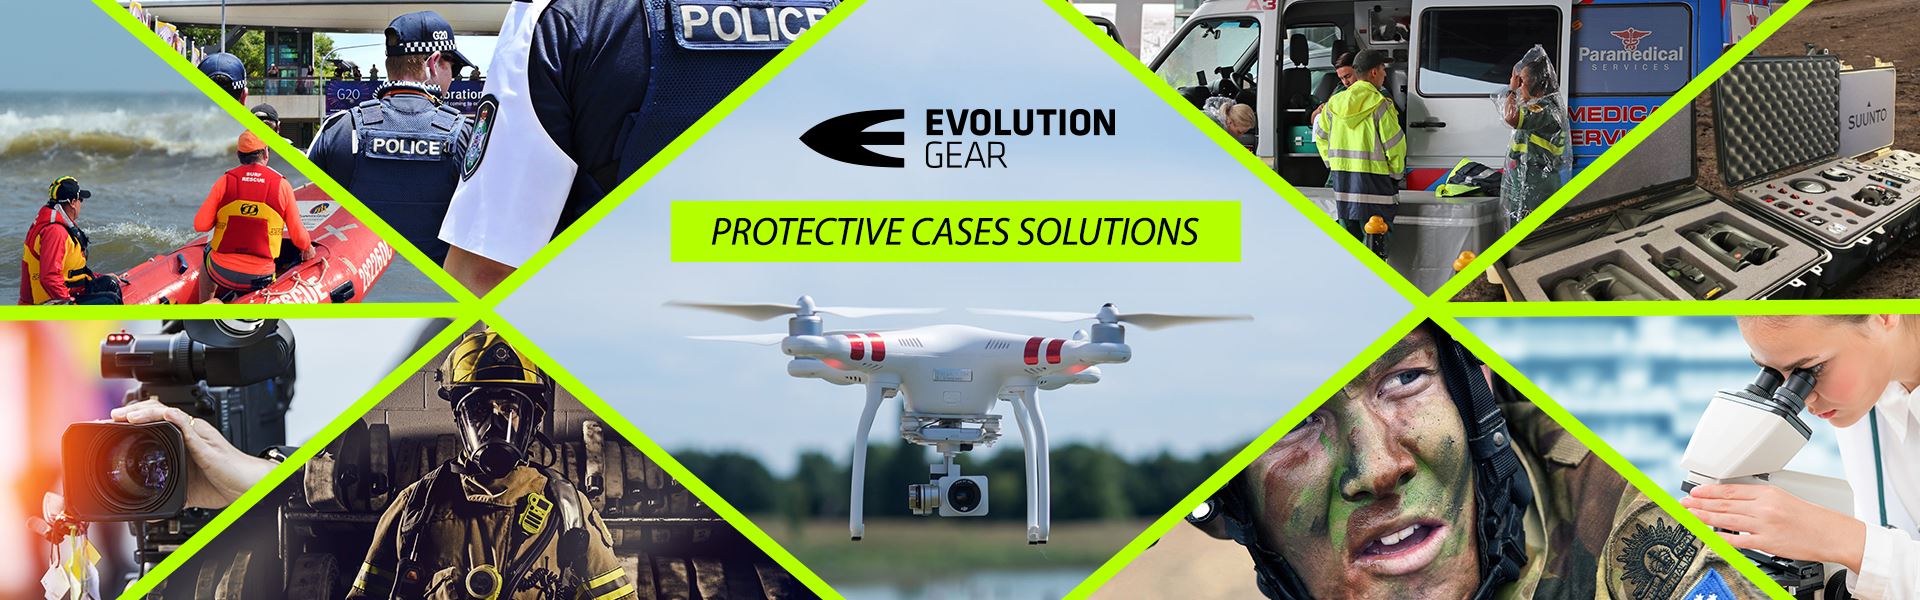 Evolution Gear - Protective Cases Solutions